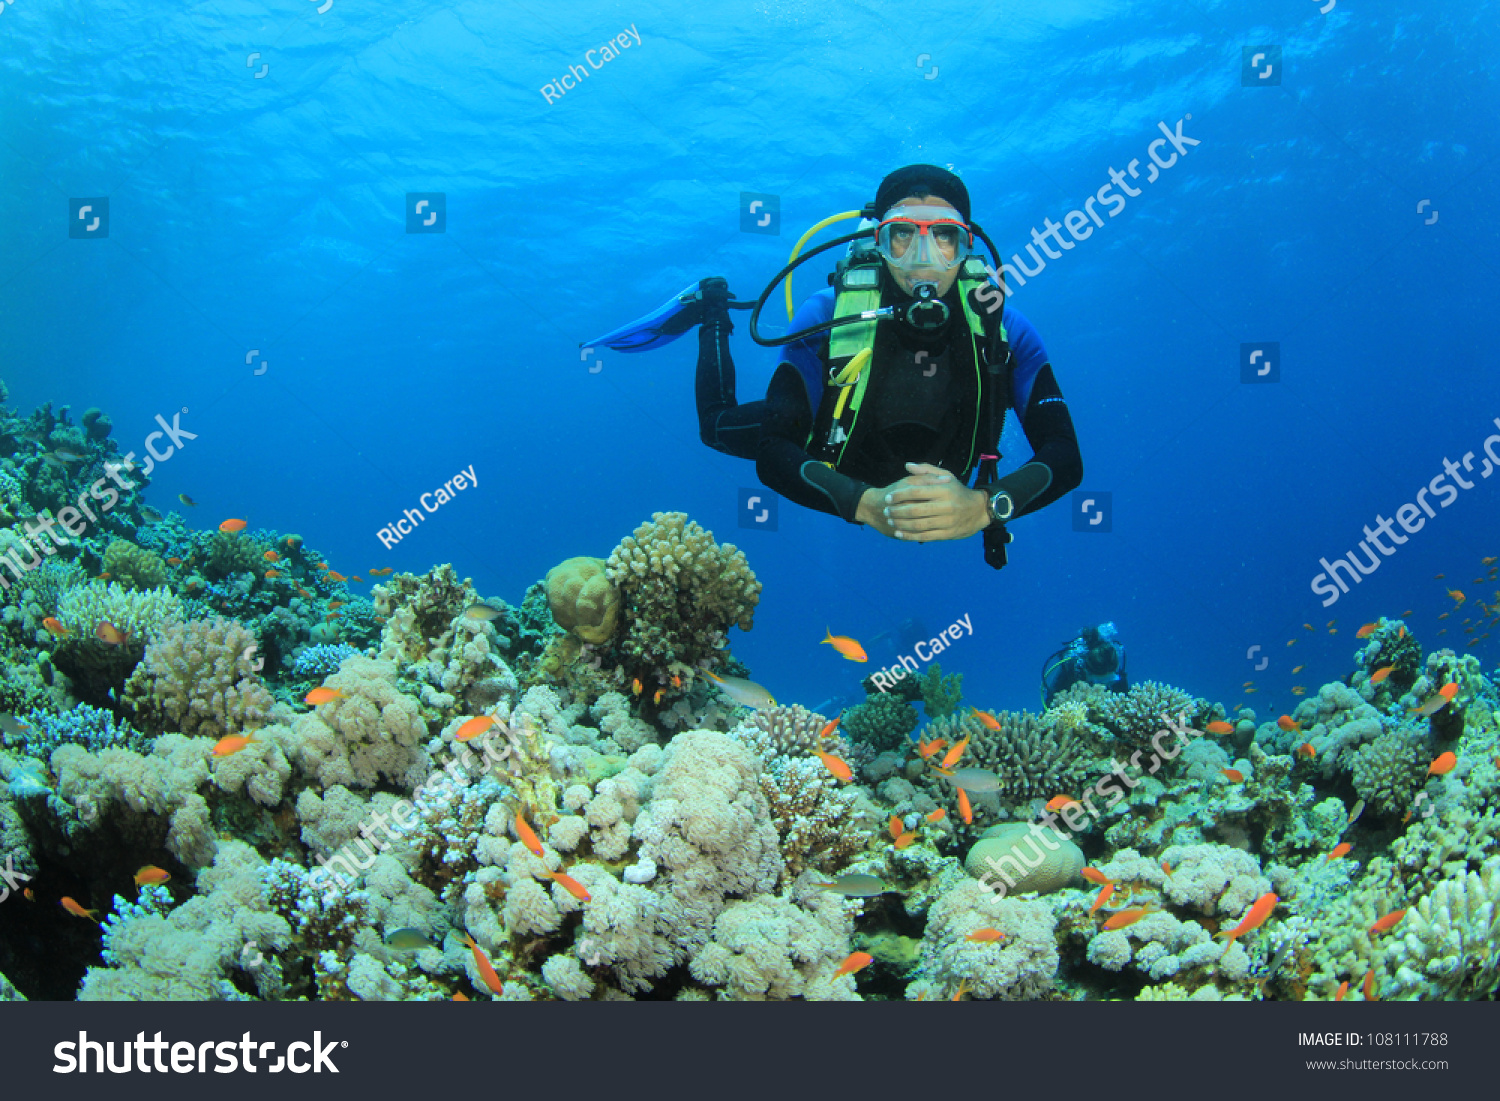 Scuba Diver swims over coral reef in the Red Sea #108111788